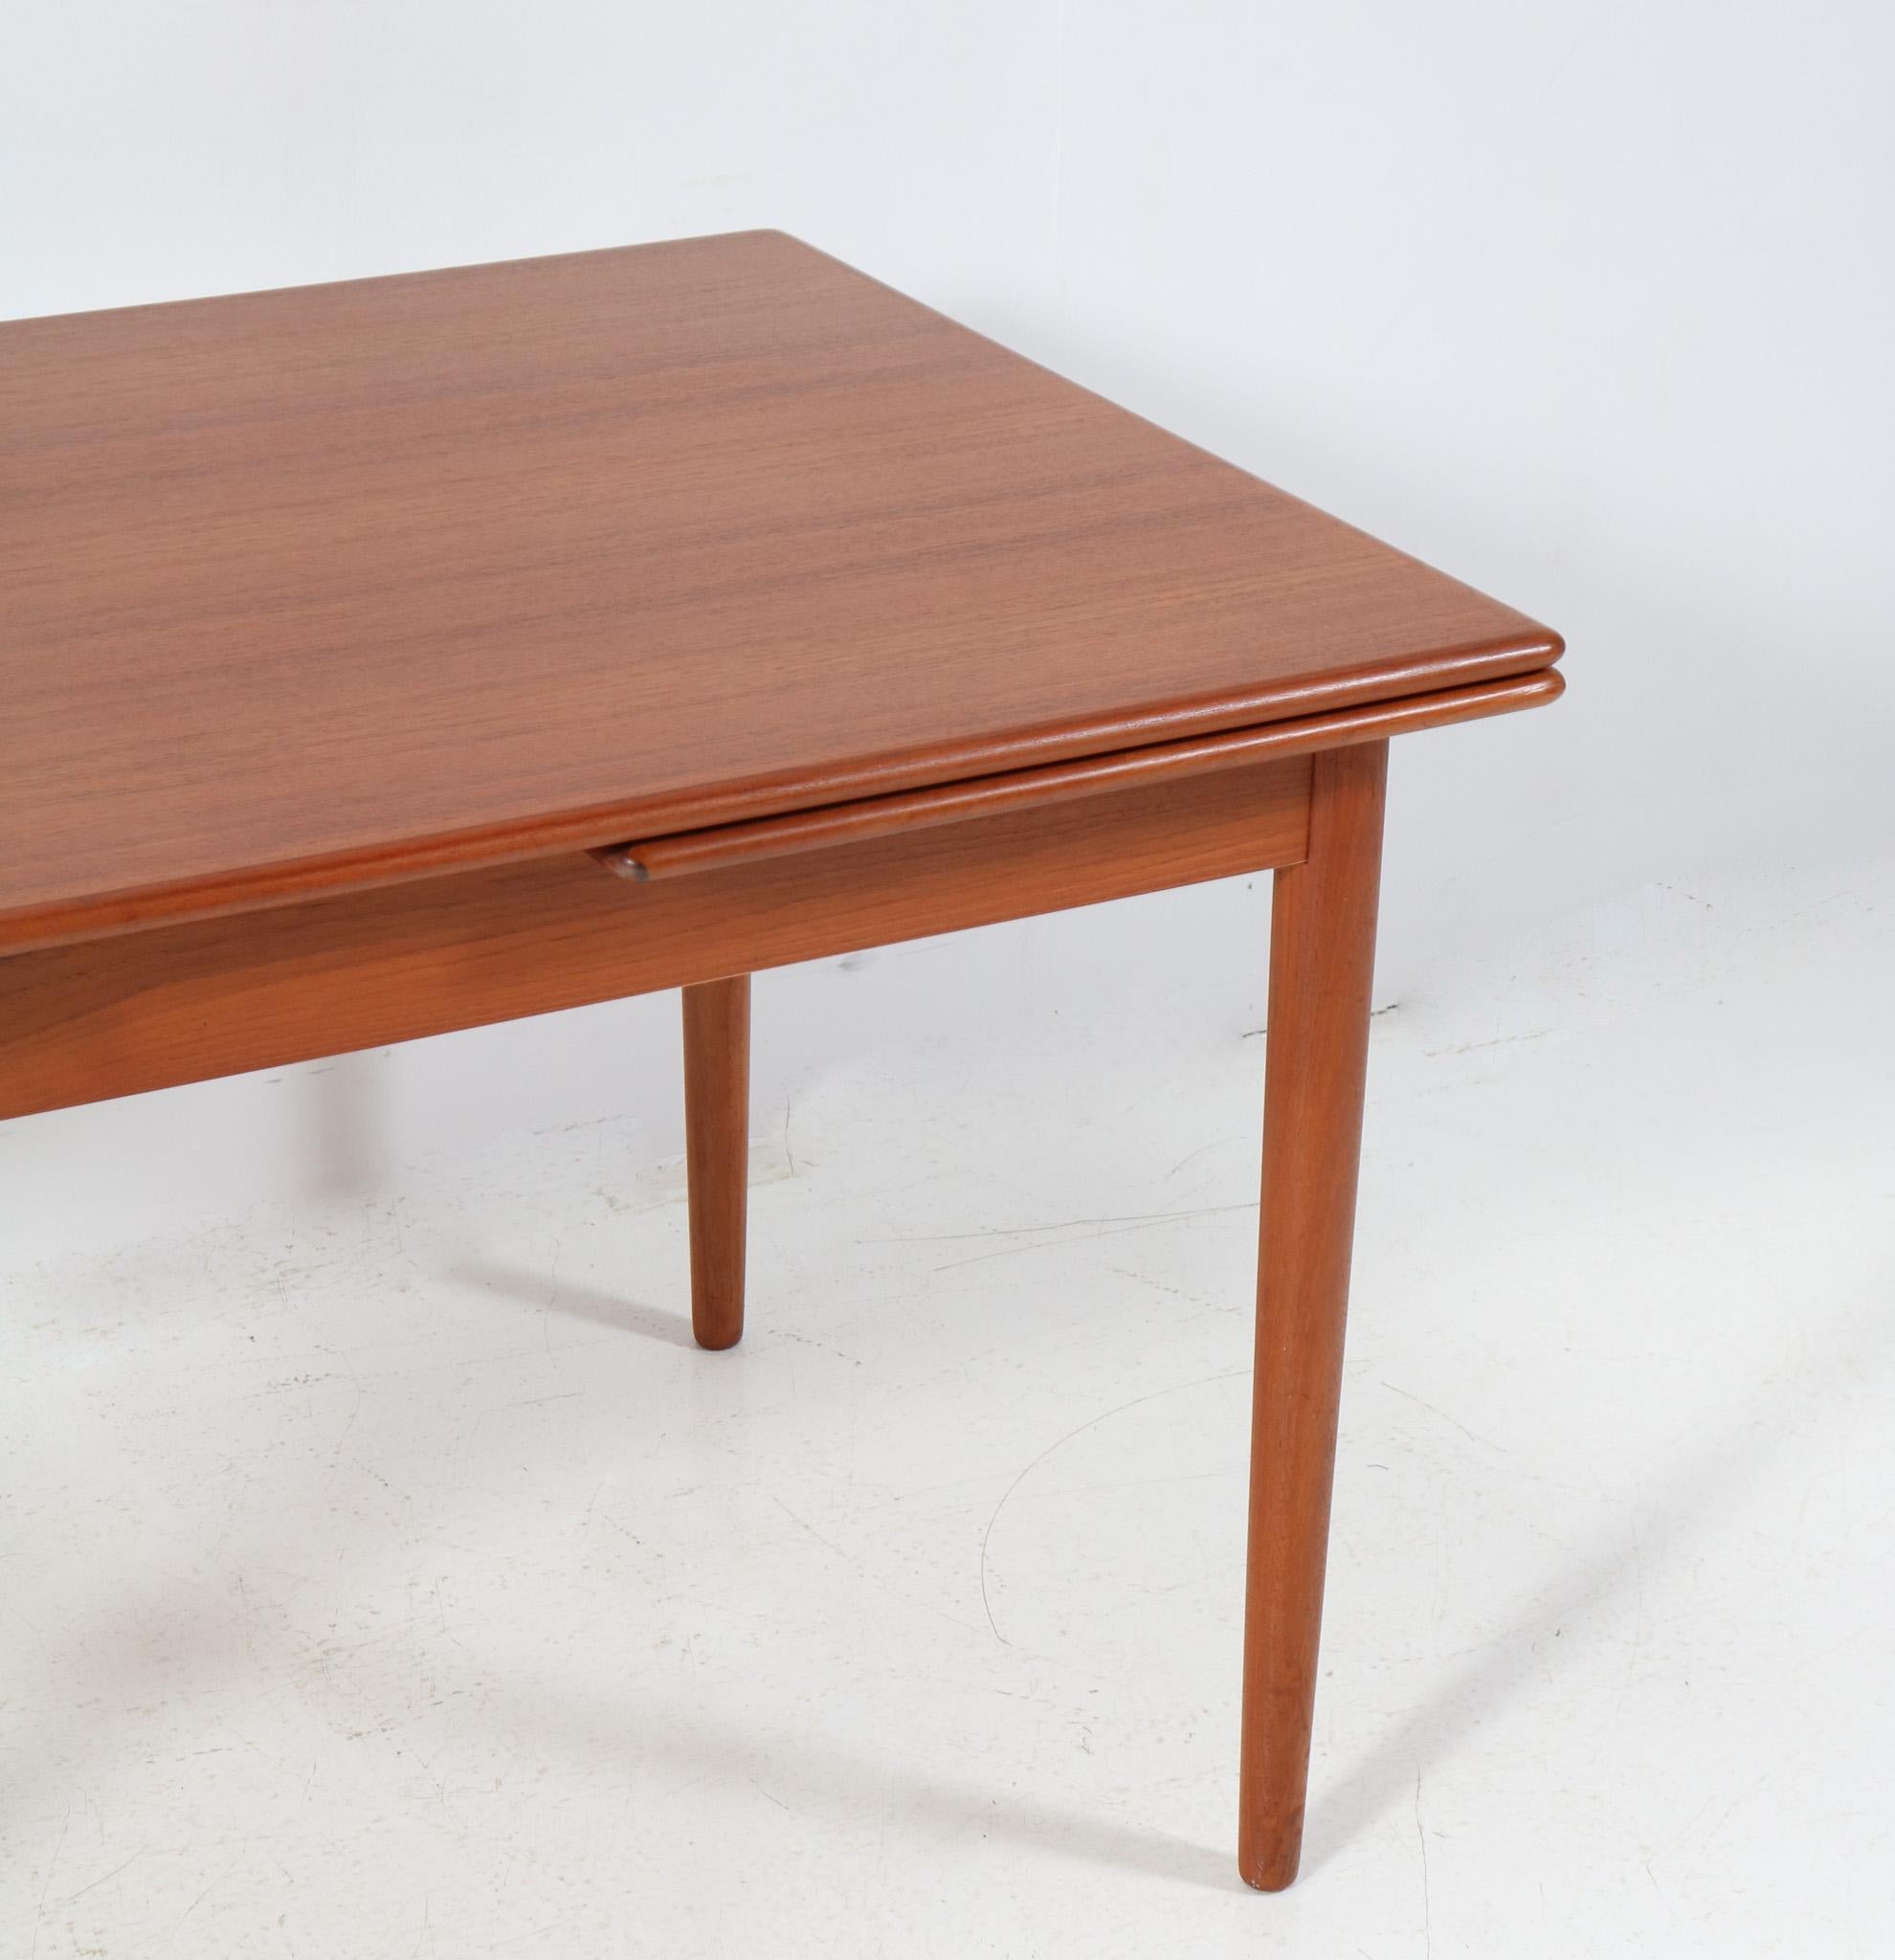 Danish Teak Mid-Century Modern Extendable Dining Room Table Mo. 215 by Farstrup, 1960s For Sale